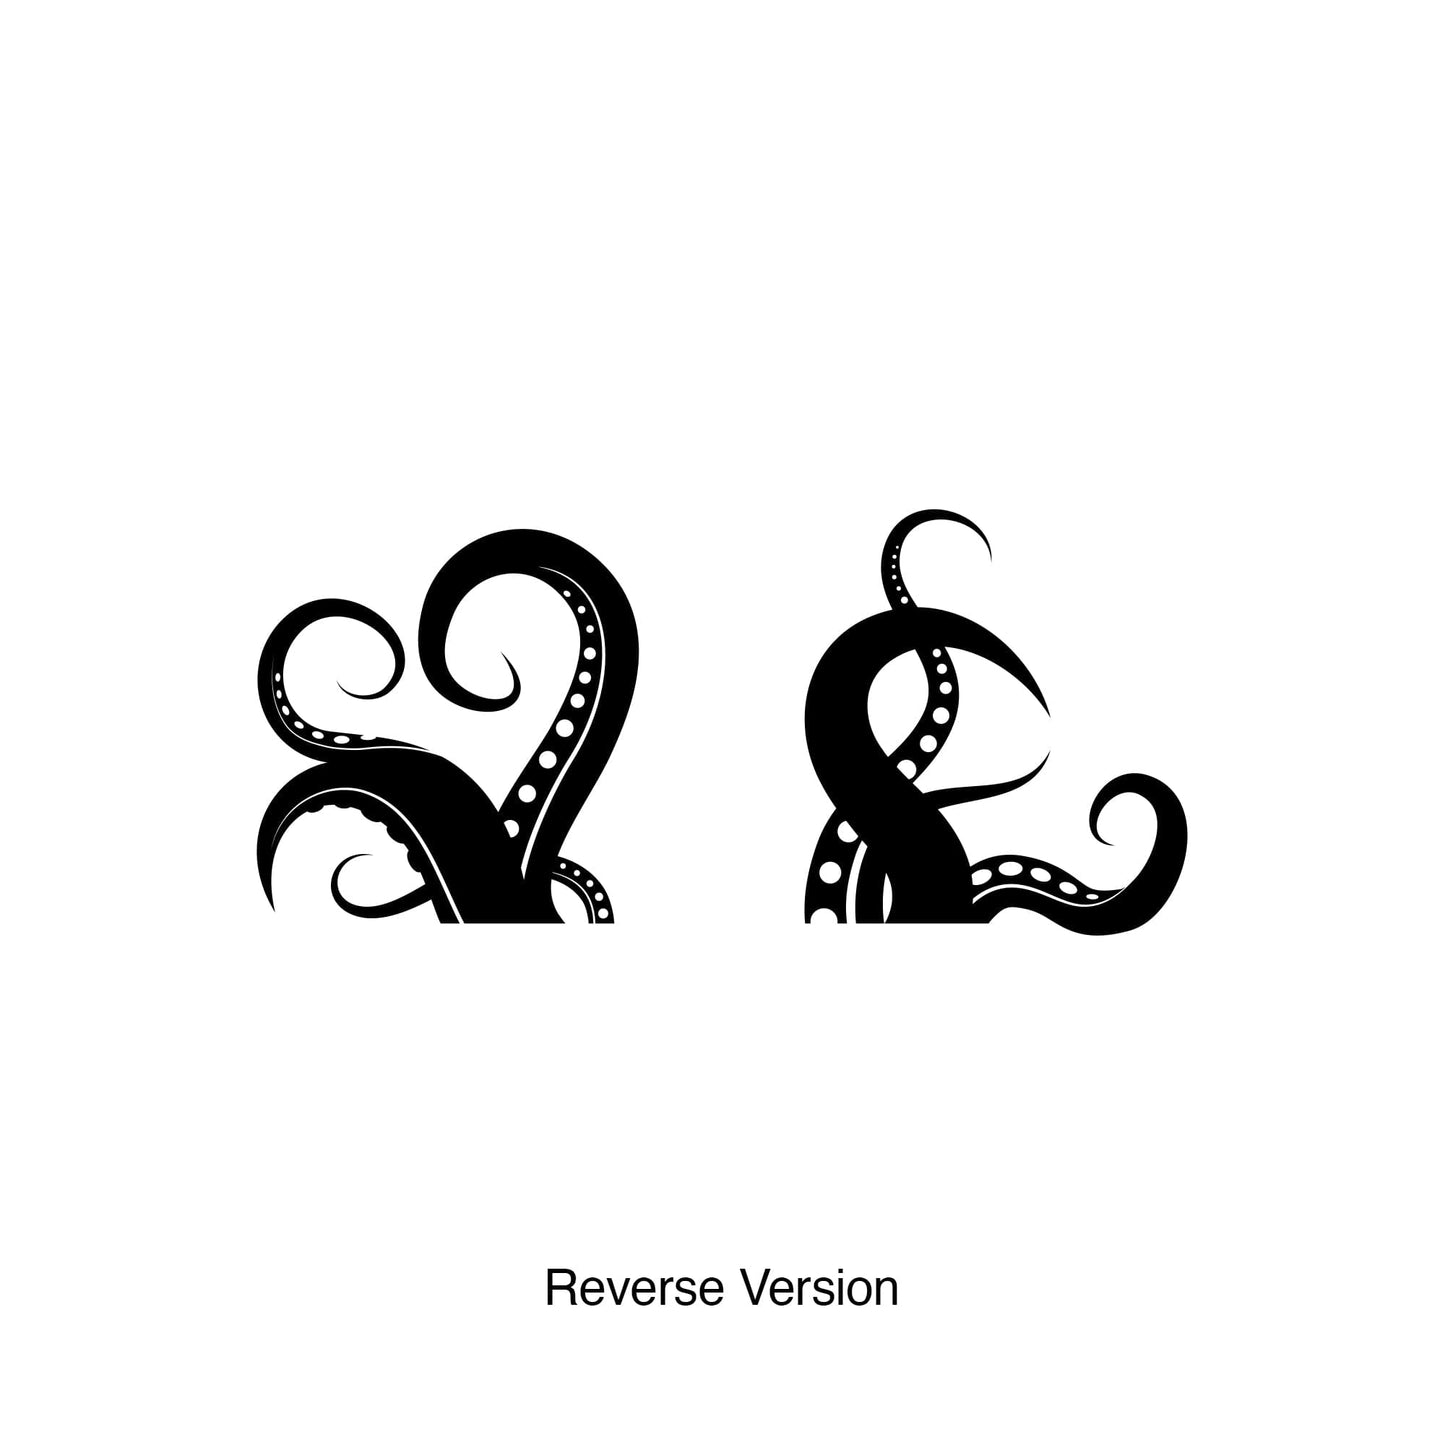 A black octopus tentacle decal on a white background.